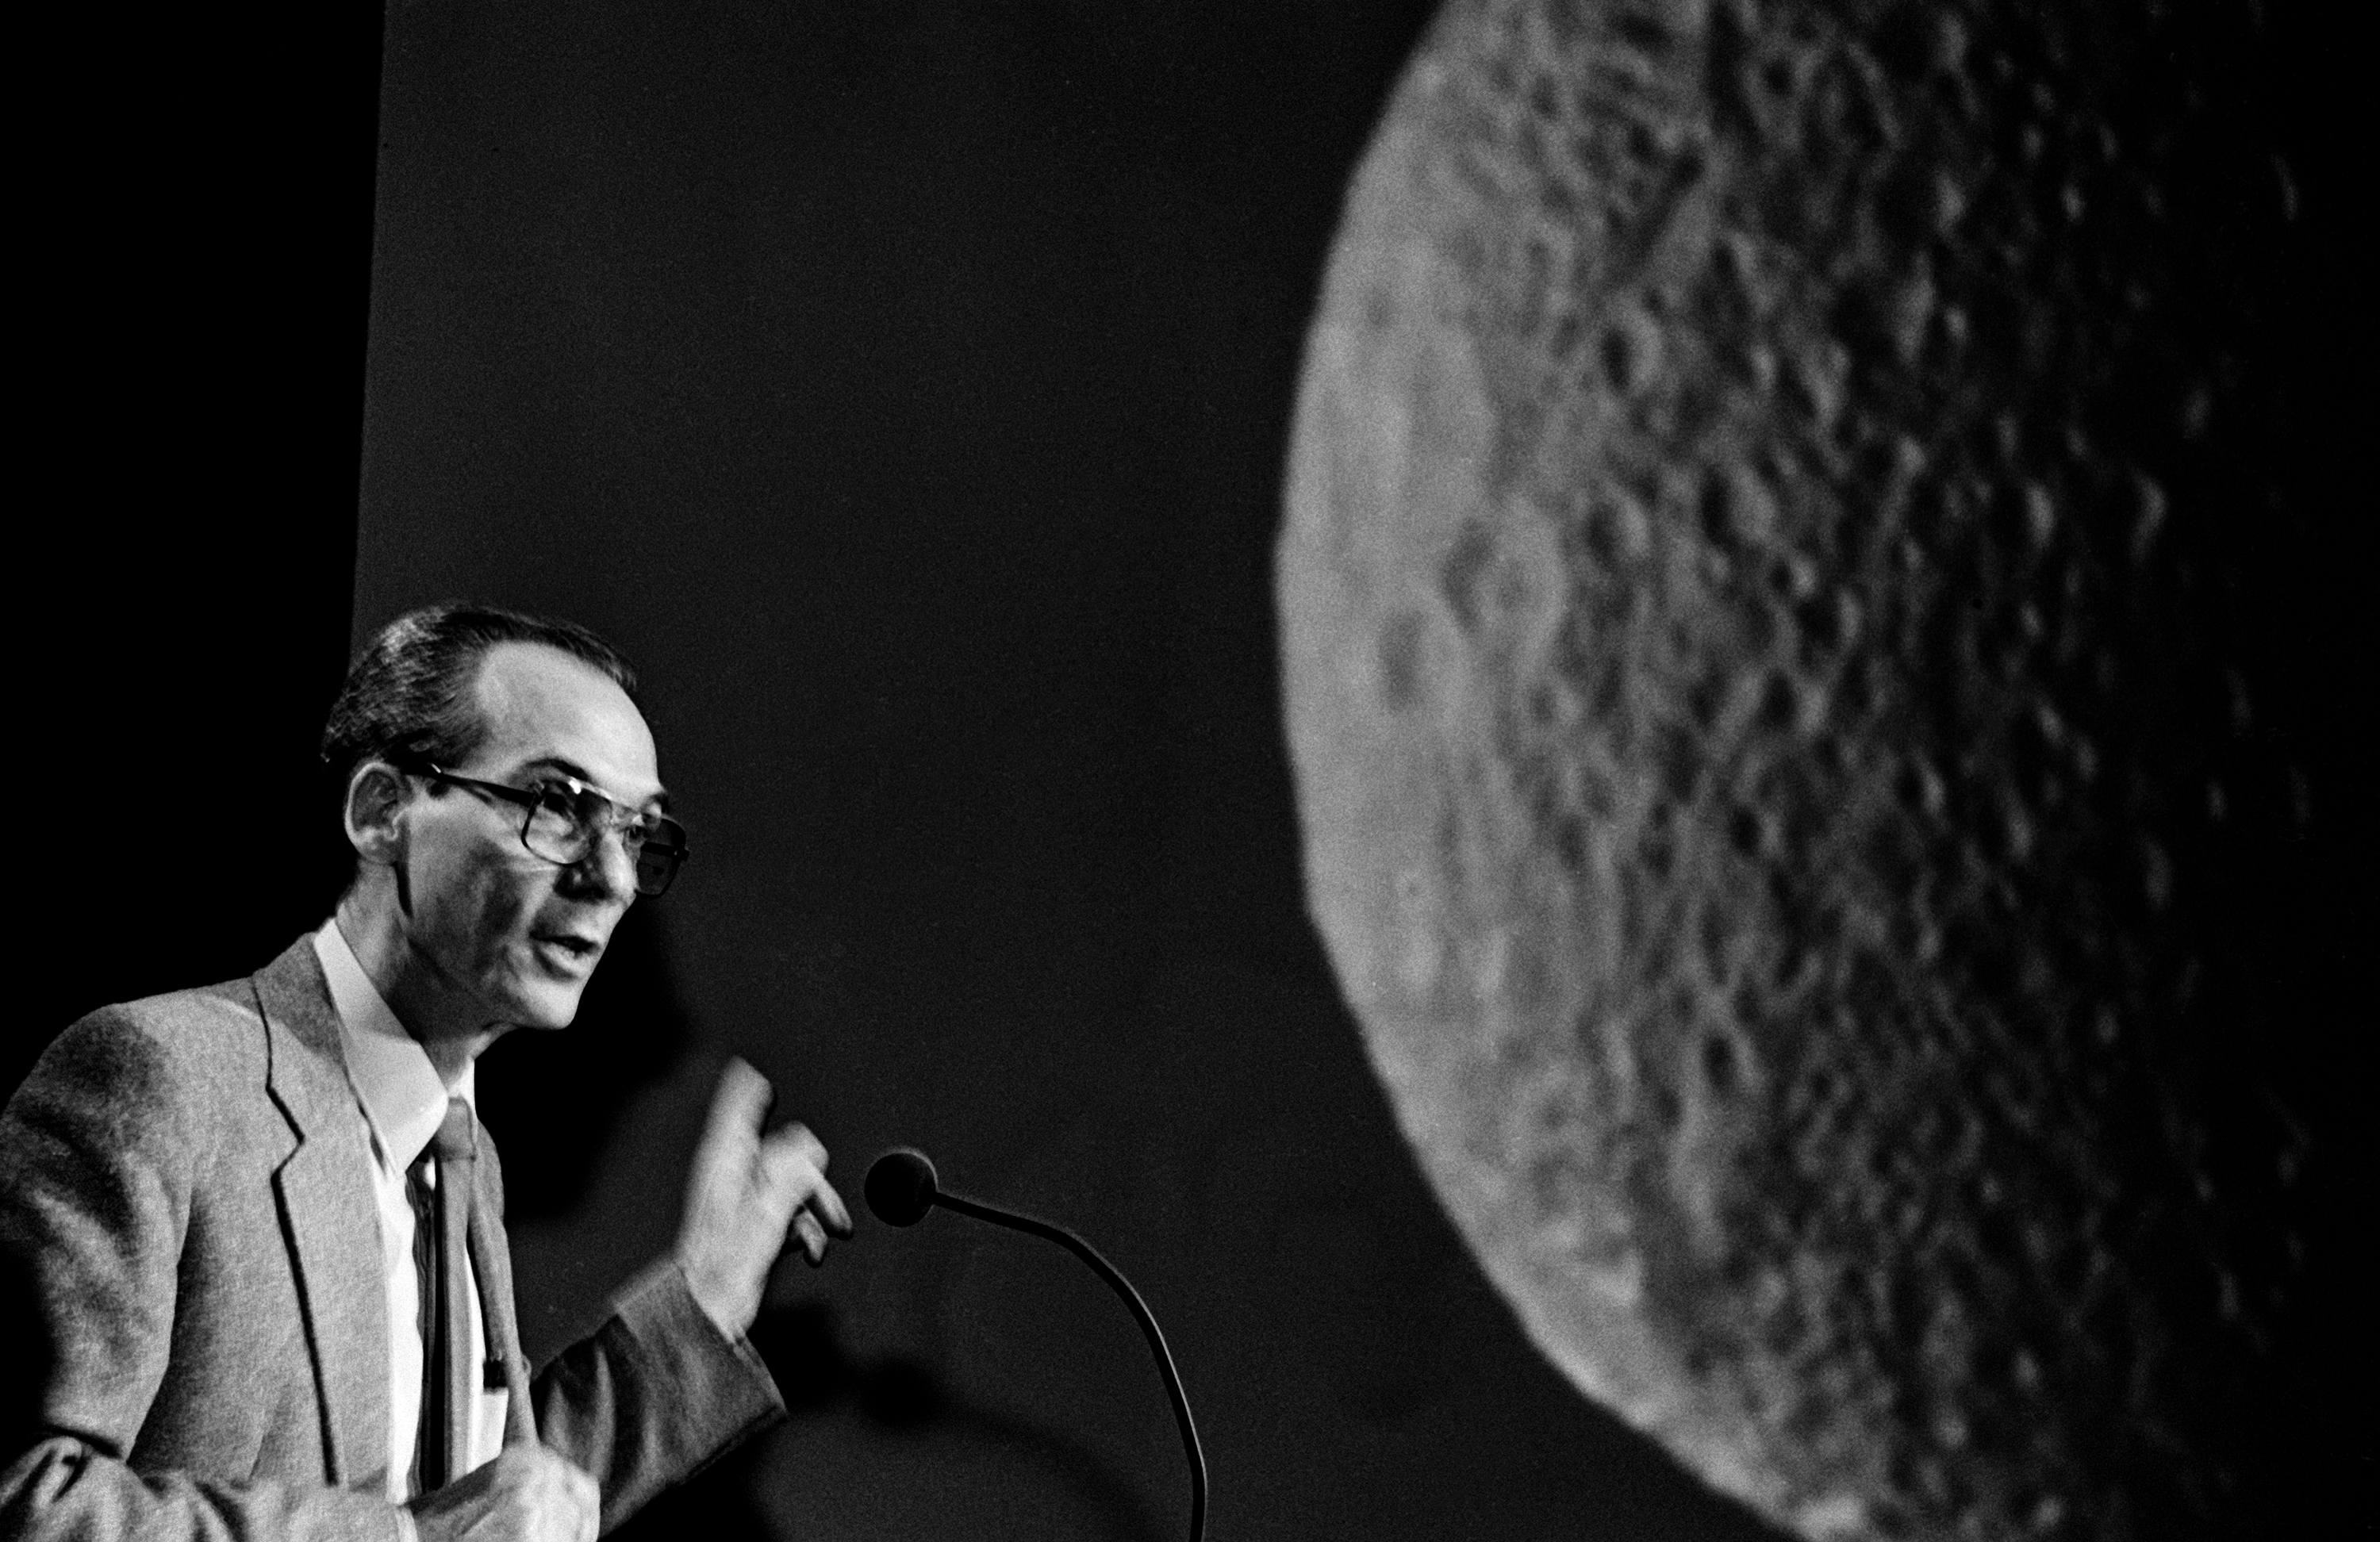 Stone briefs reporters during a press conference at Nasa’s Jet Propulsion Laboratory during Voyager 2’s encounter with Neptune, on August 25, 1989, in Pasadena, California